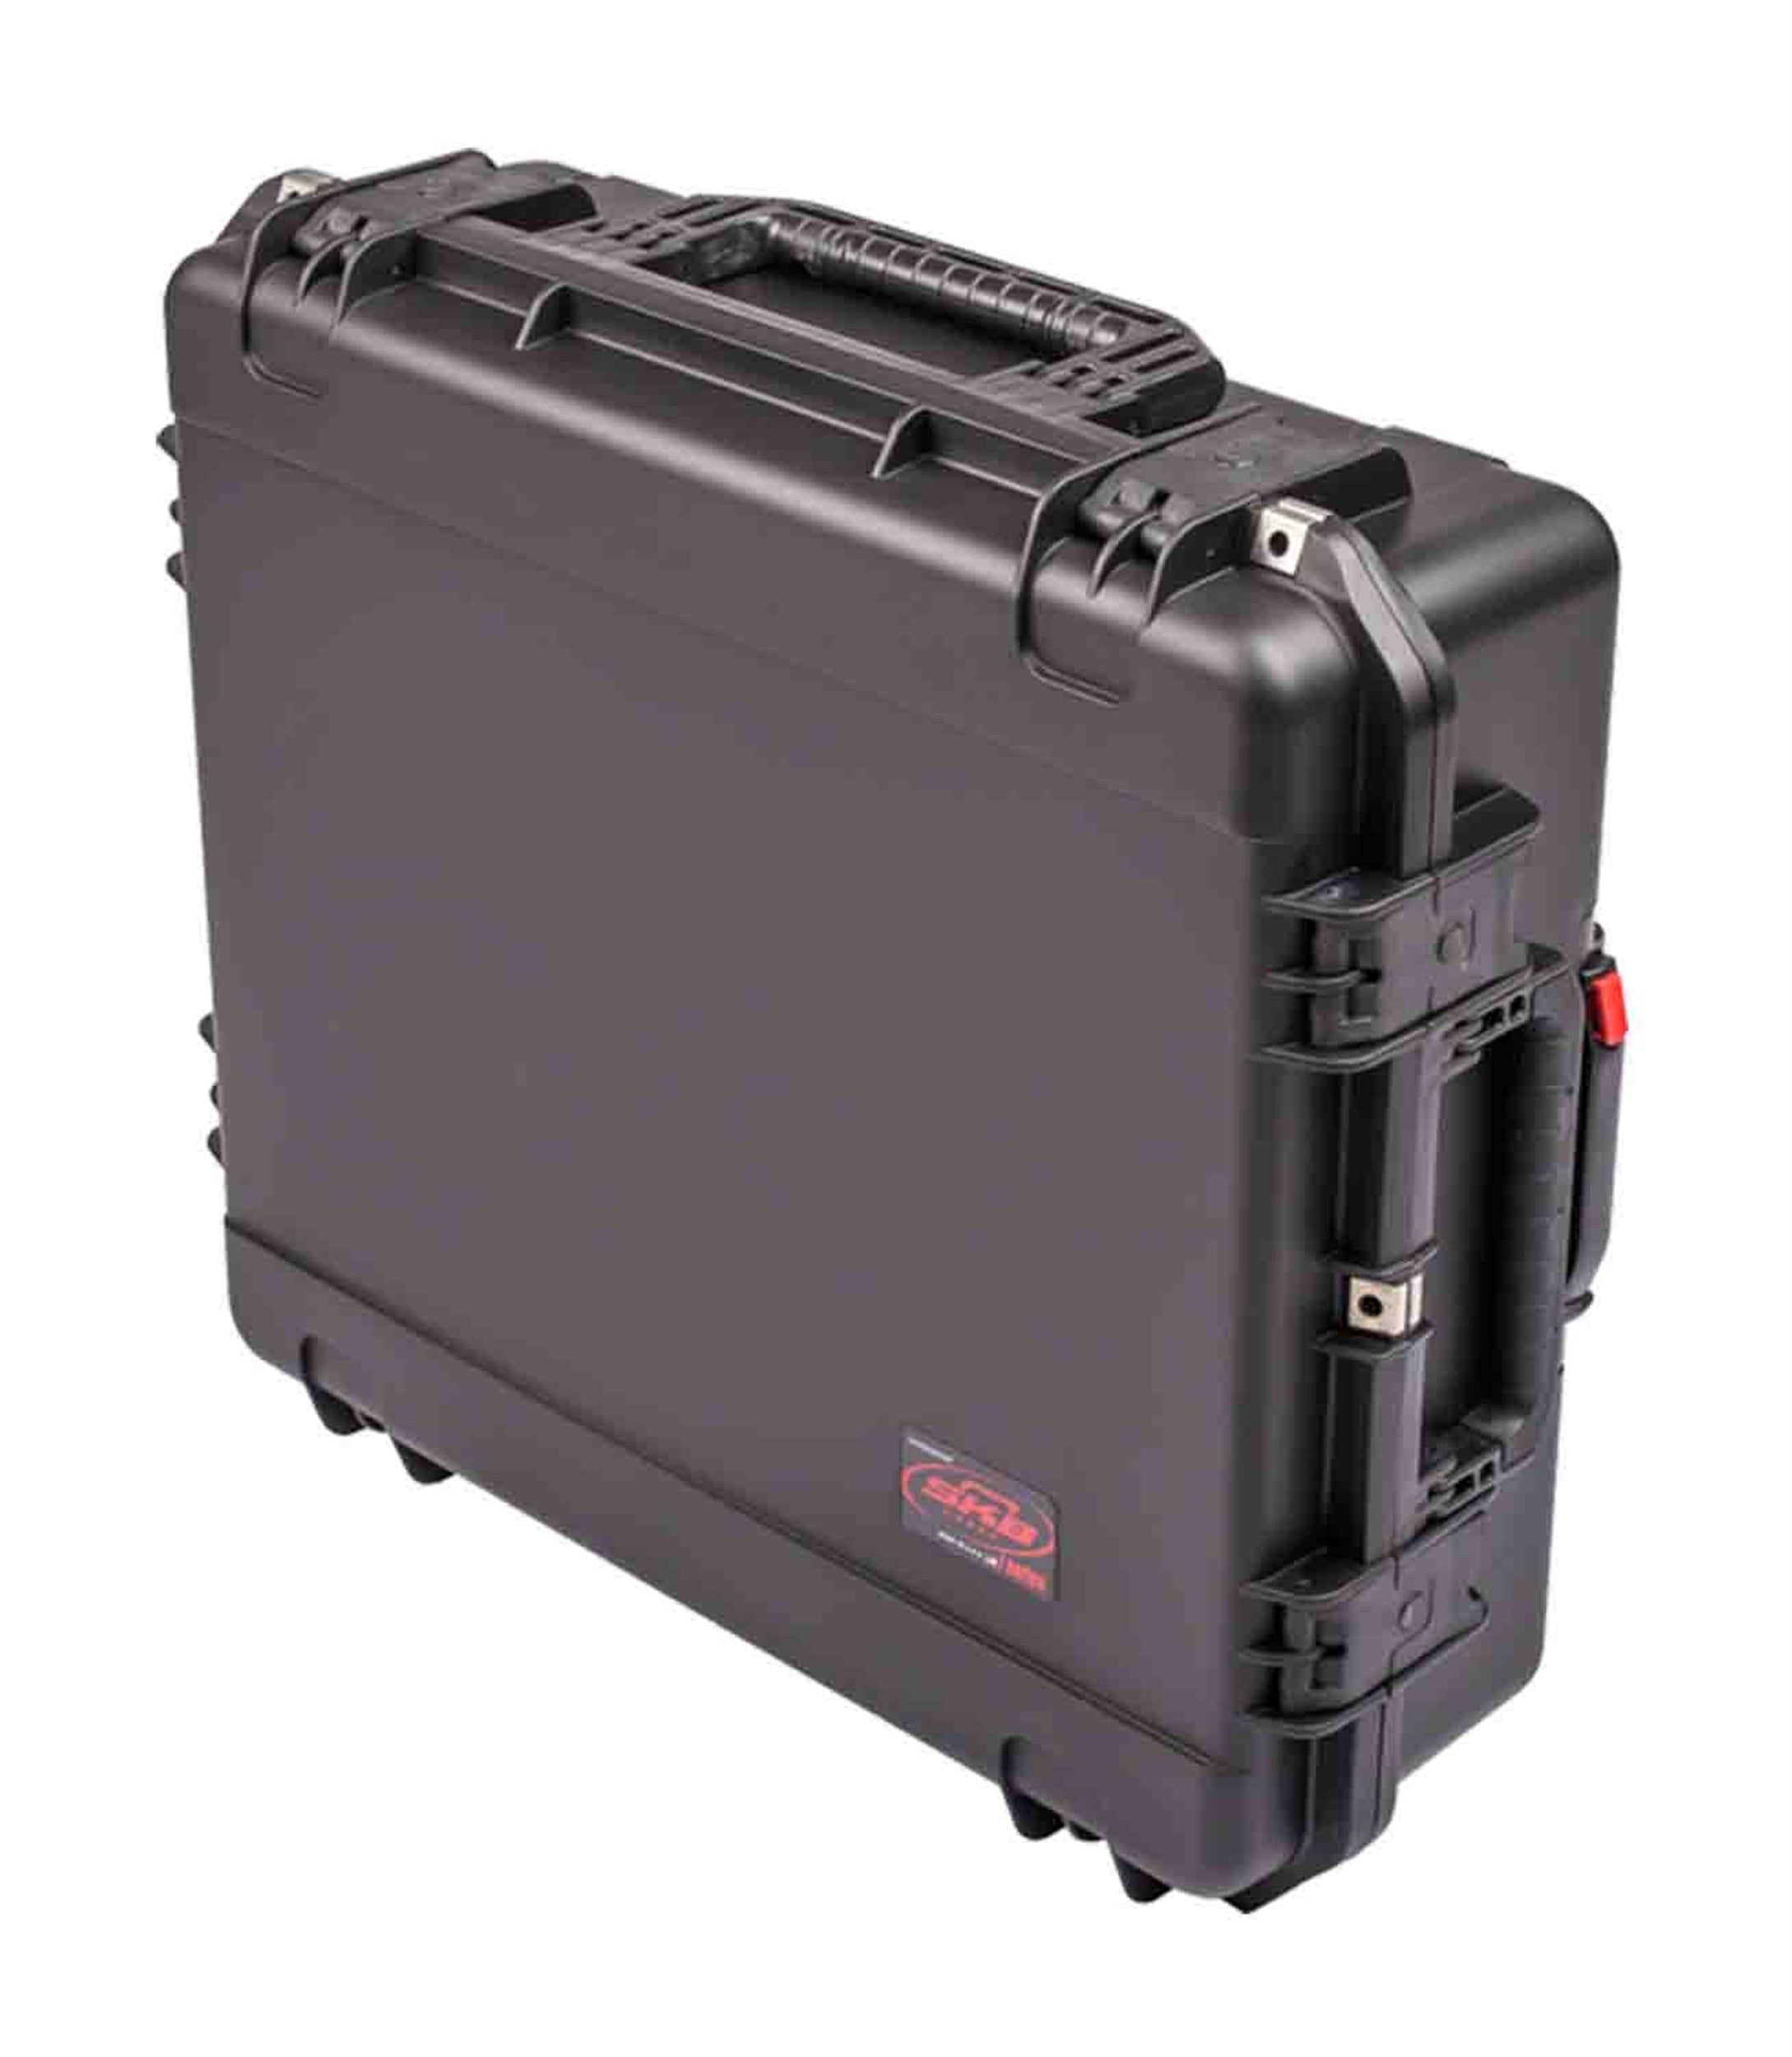 SKB iSeries 3i-2421-7BE Injection Molded Mil Standard Waterproof Case for Pioneer DJMA9 with Wheels - Hollywood DJ